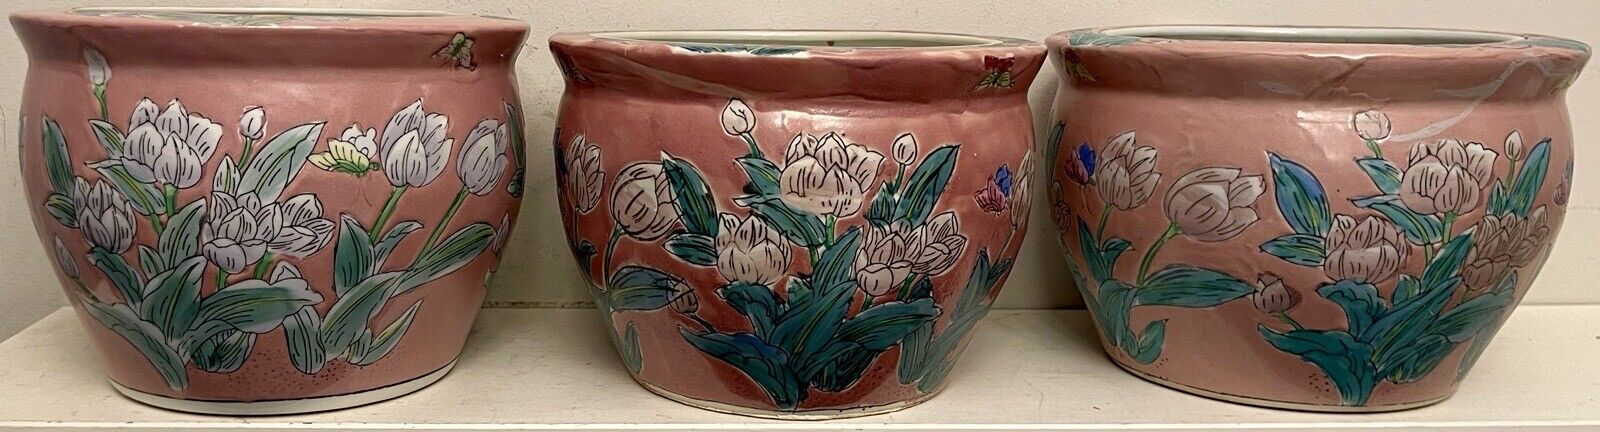 3 Chinese Porcelain Jardiniere Planter/Koi Fish Bowl Floral Butterfly Tulip 9.5”